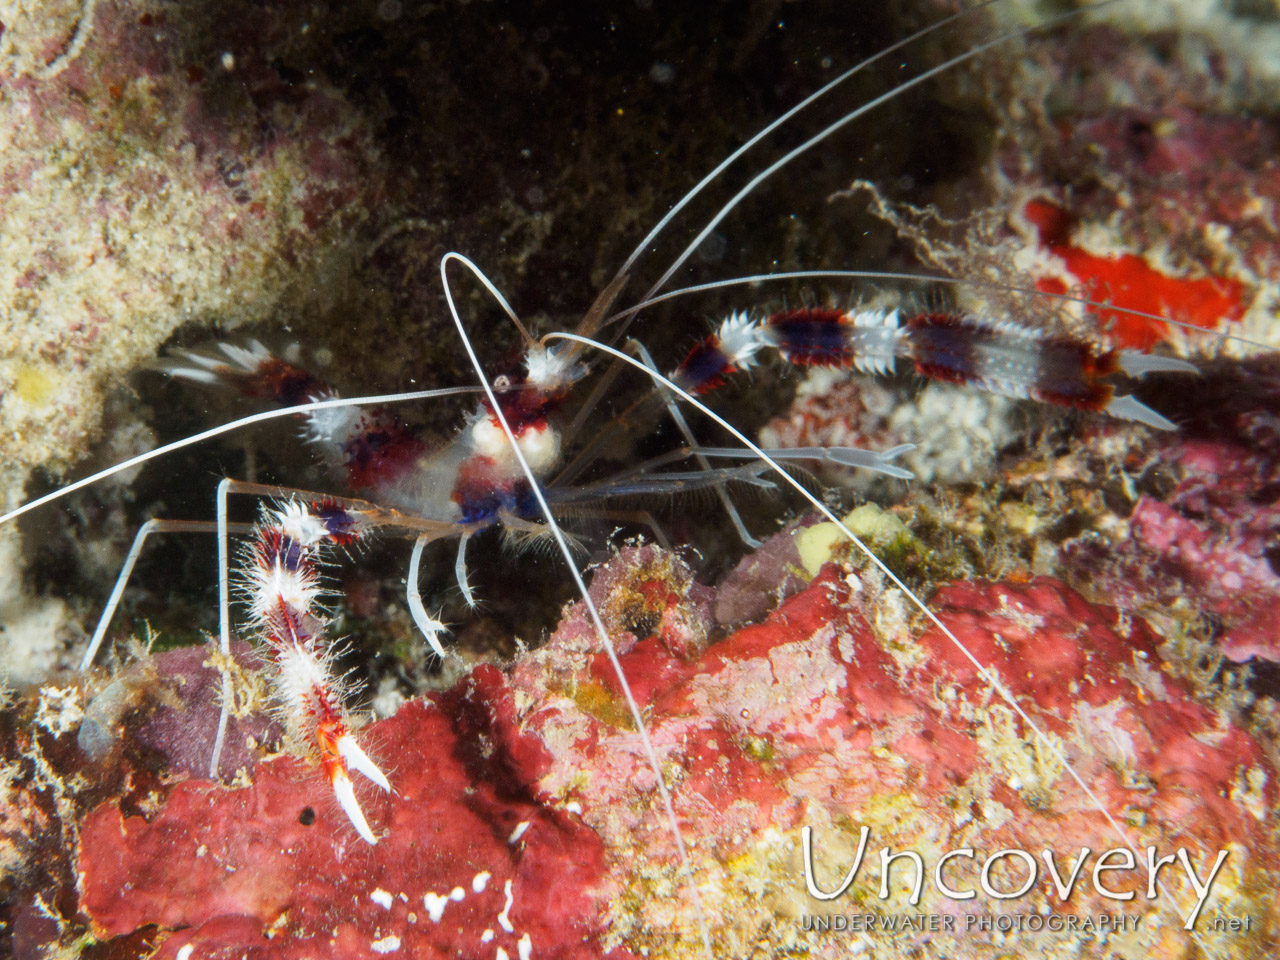 Banded Coral Shrimp (stenopus Hispidus), photo taken in Maldives, Male Atoll, South Male Atoll, South Reef Out